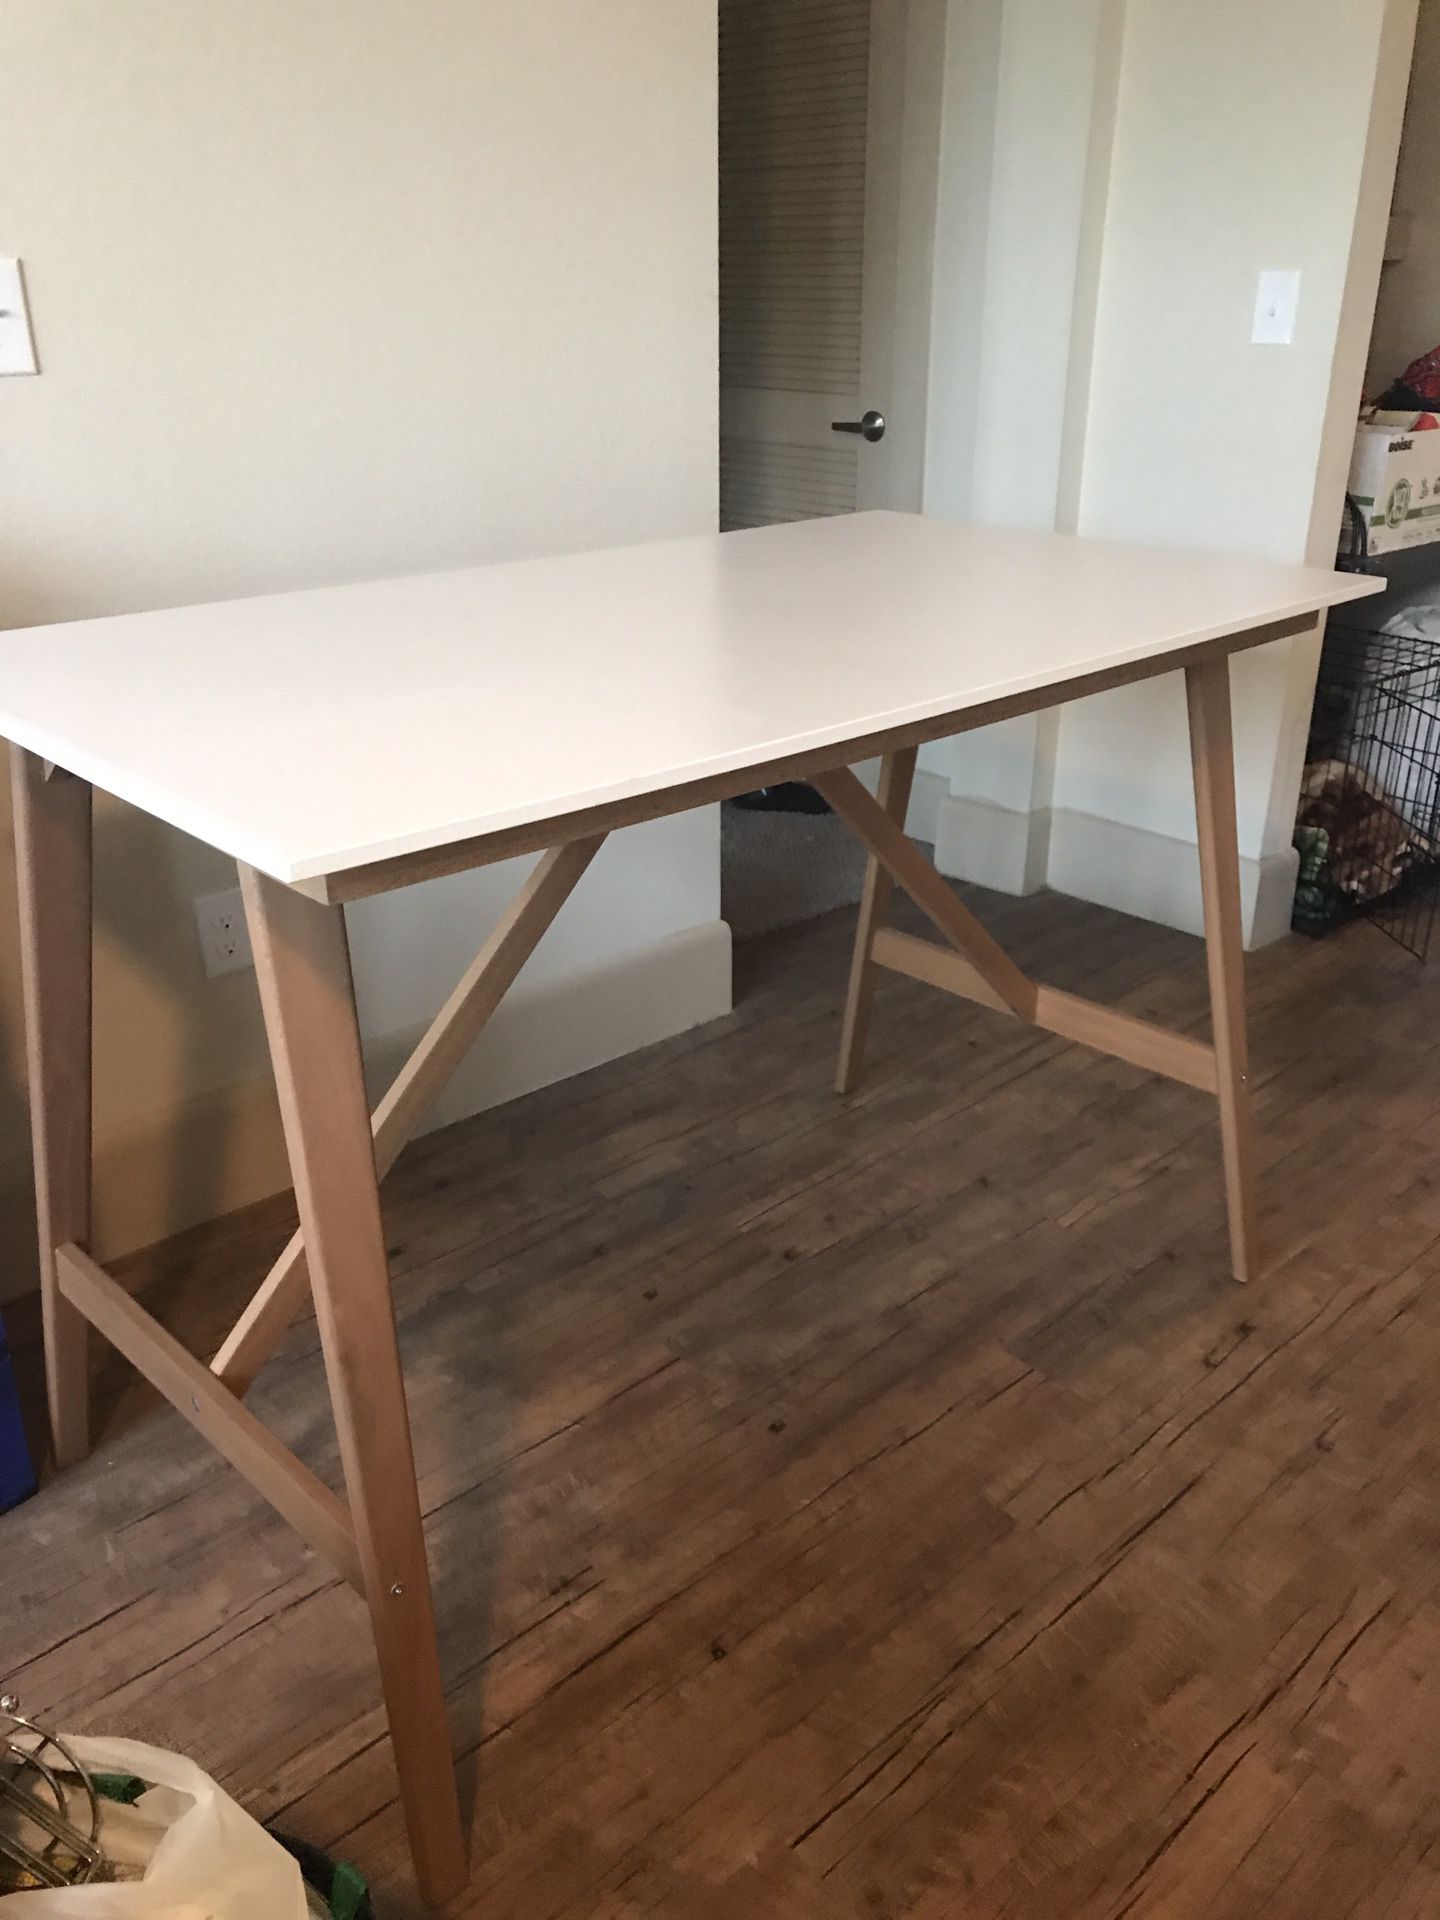 High Table for Dining or Standing Desk